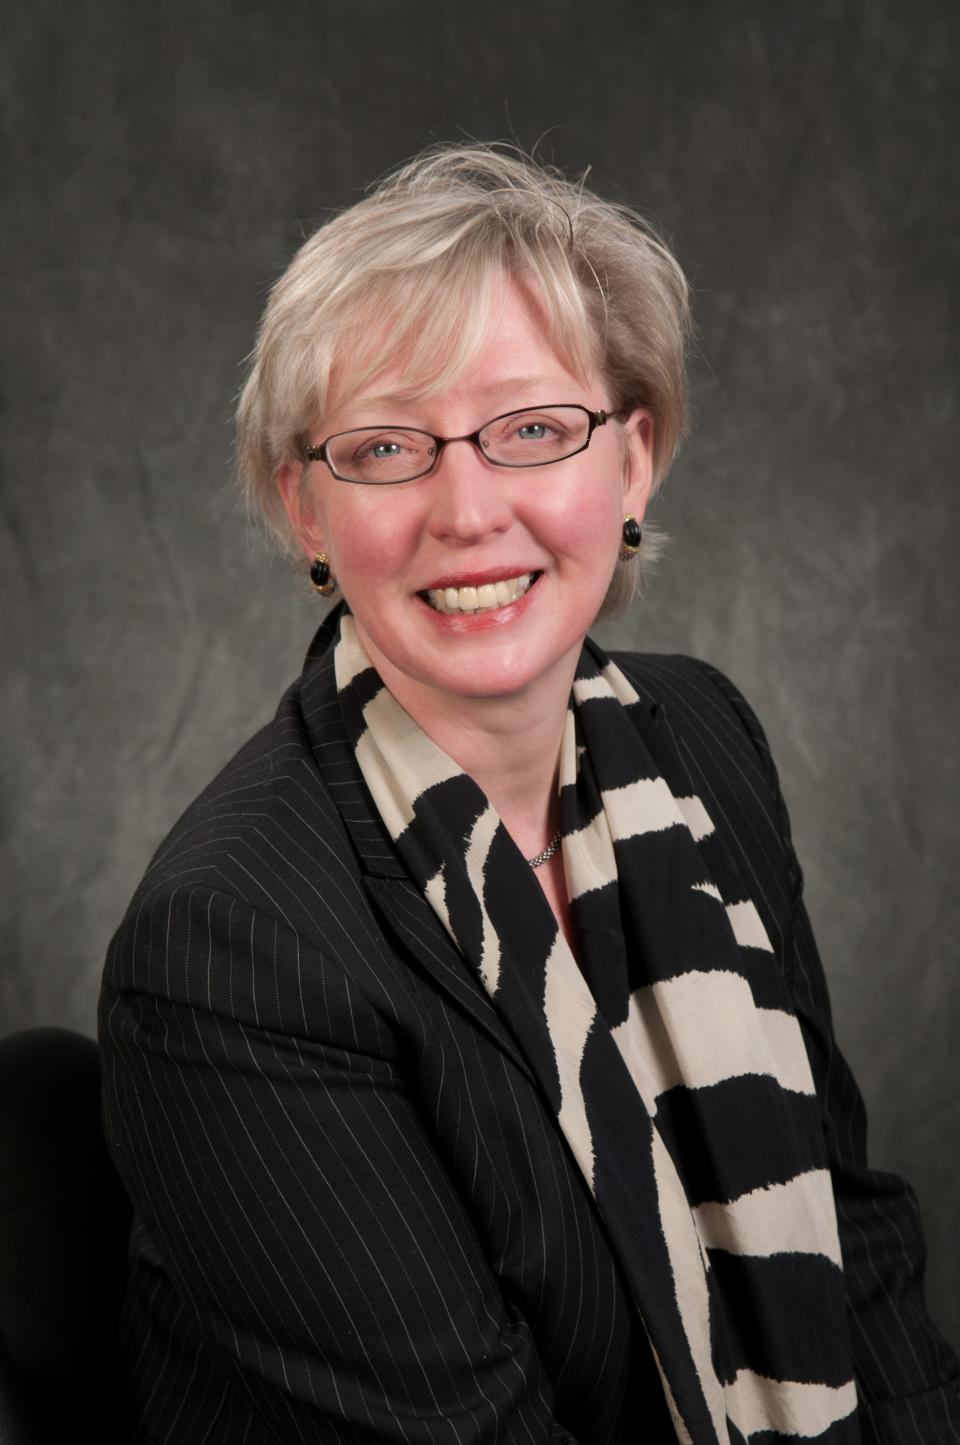 Kate Judge is executive director of the American Nurses Foundation.